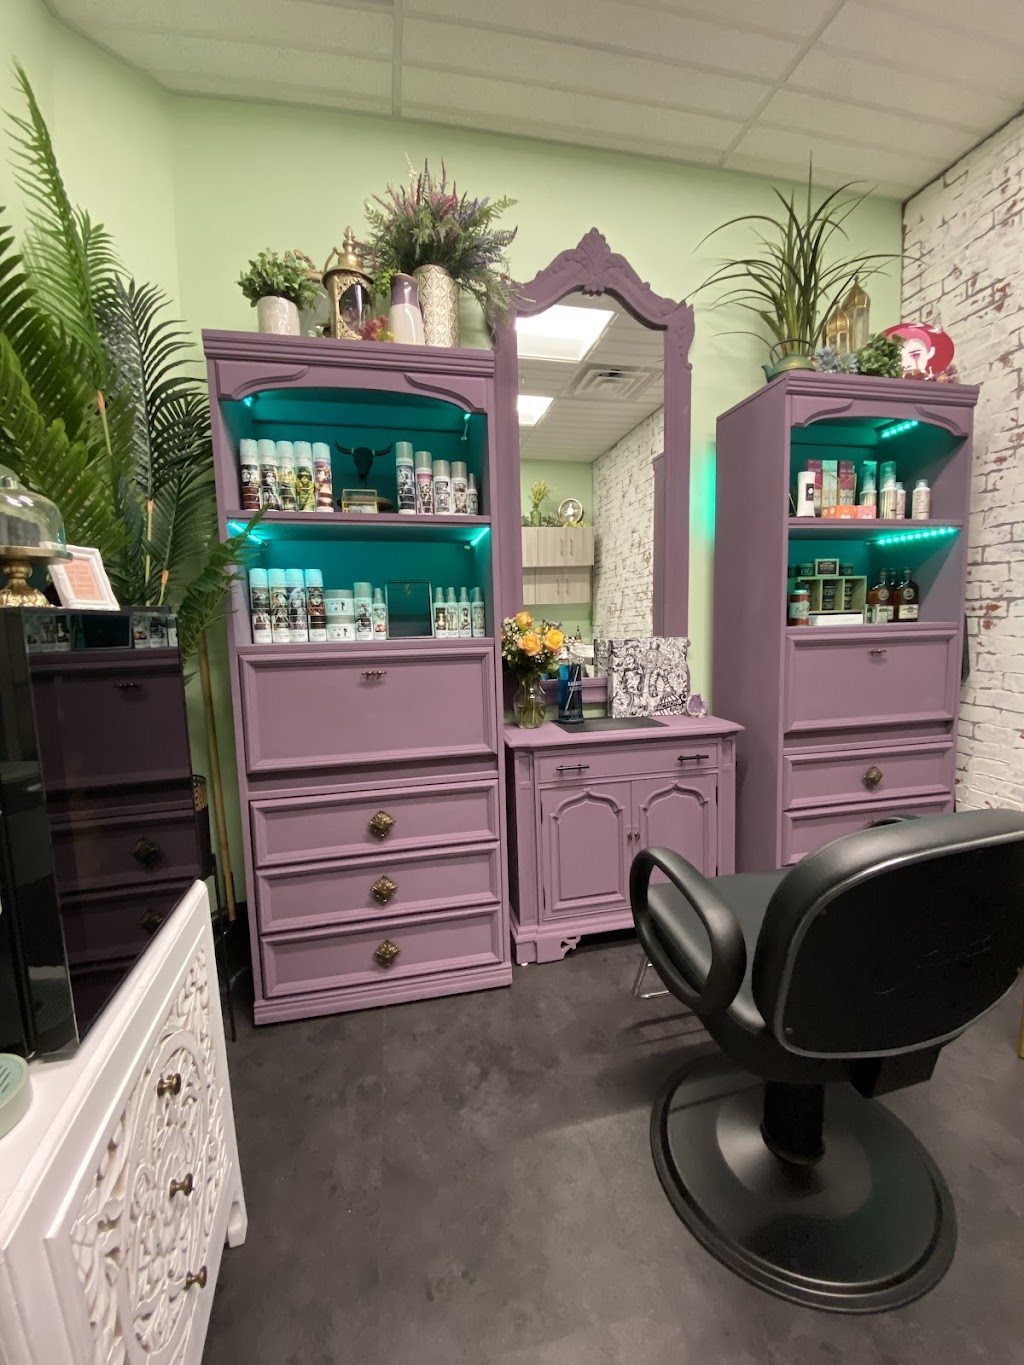 Into The Mirror Hair Studio | 1285 Lincoln Hwy Studio 11A, Langhorne, PA 19056 | Phone: (215) 559-9270